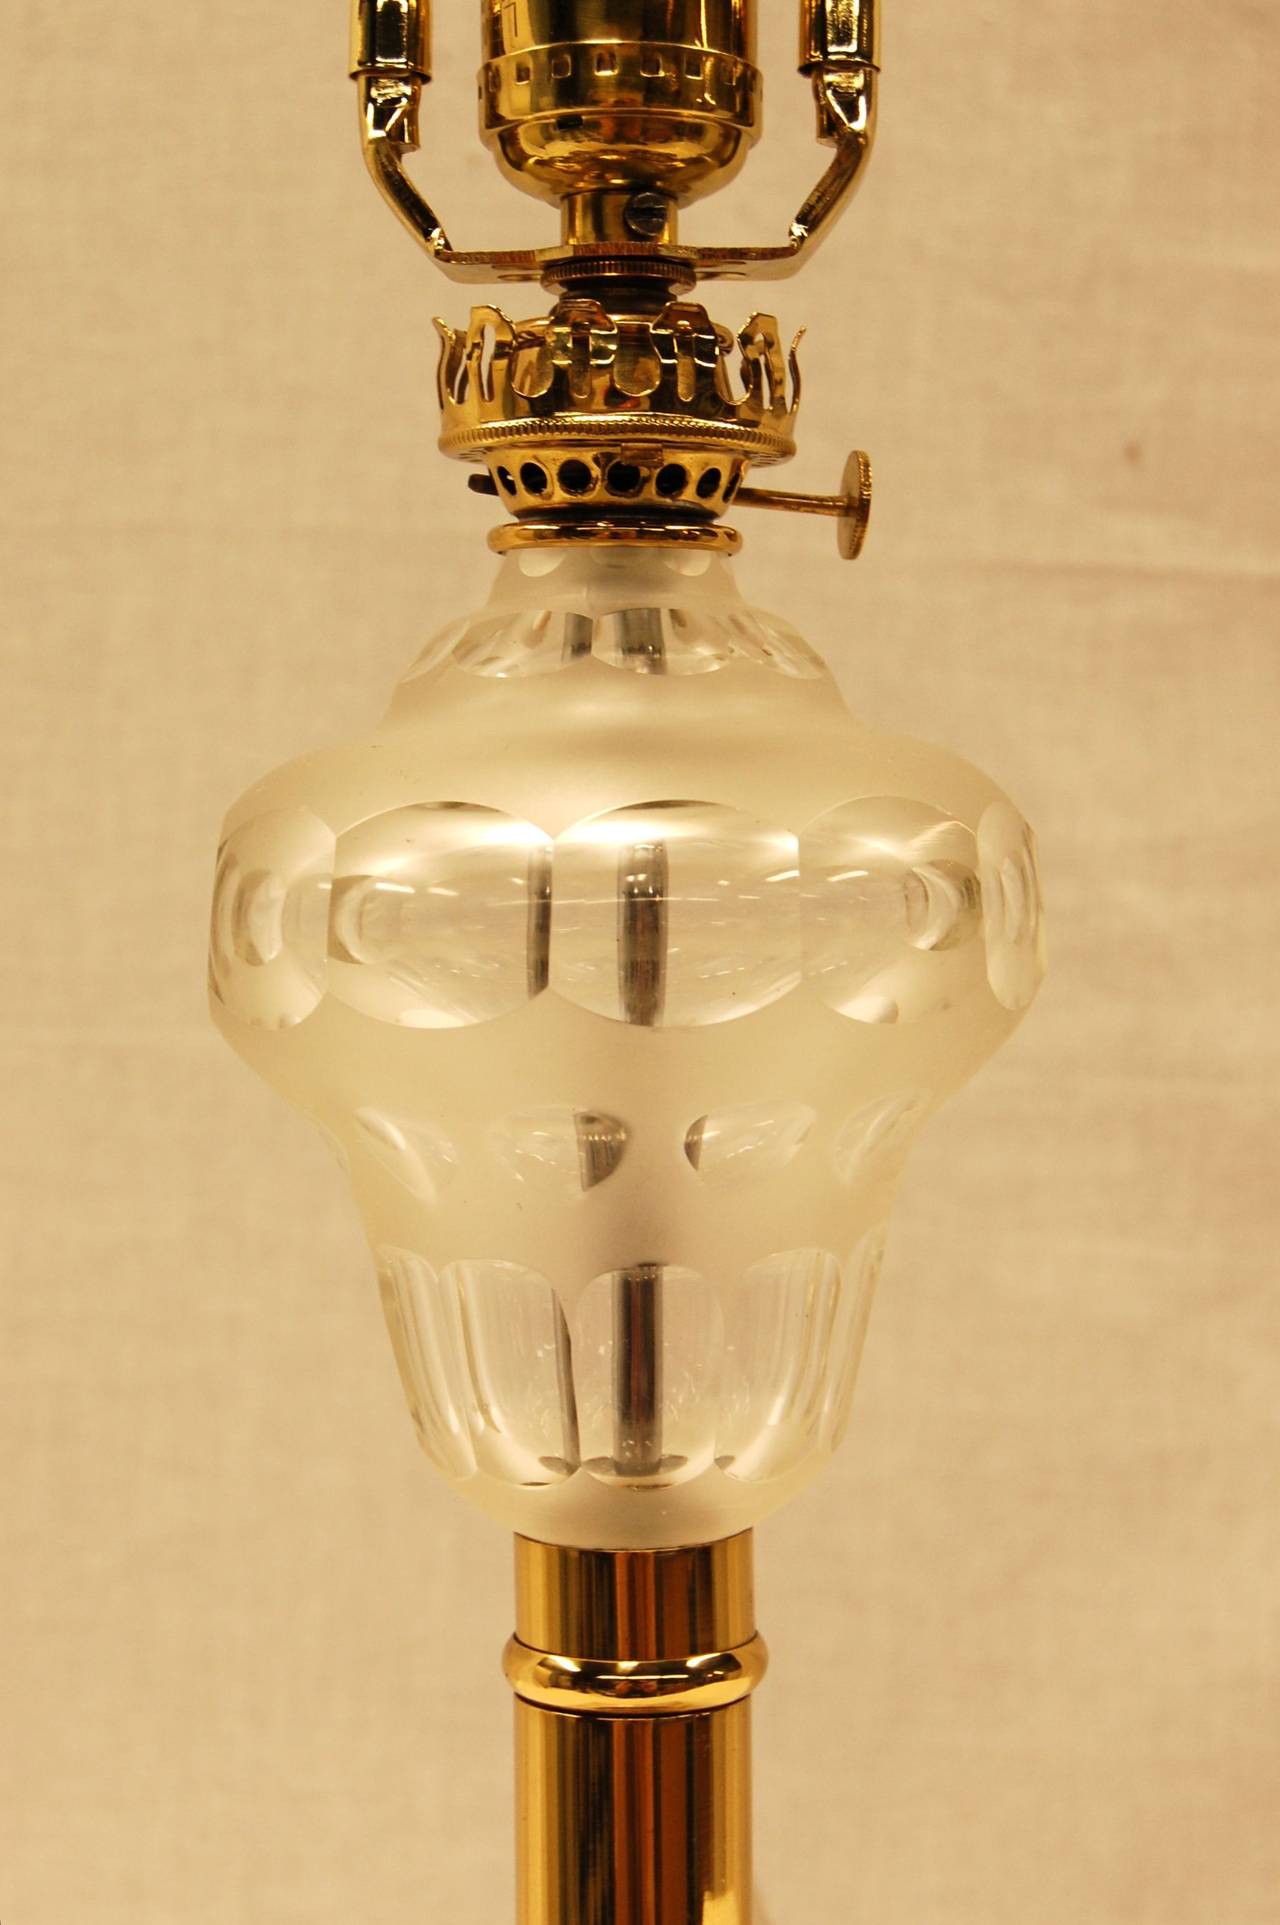 This American oil lamp has a beautiful cut and frosted glass font, and rests upon a brass column and marble base. Wired with a single switch mounted on the wire. 10 3.4